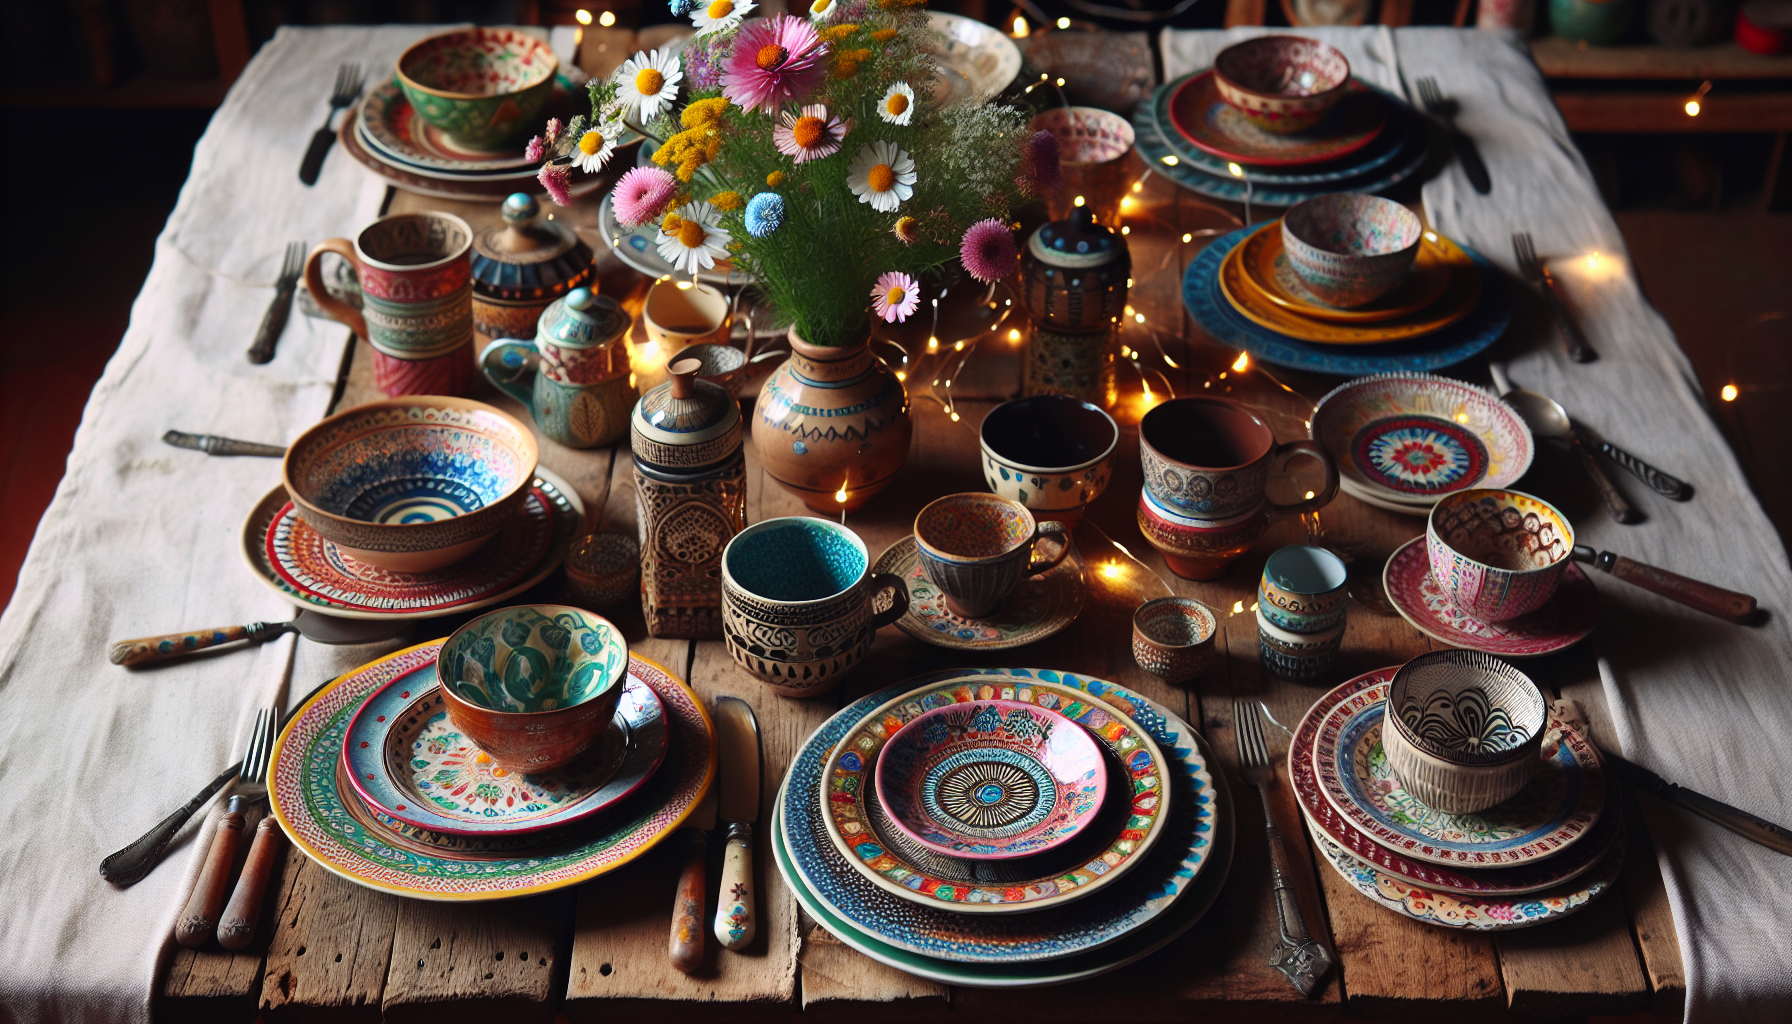 Artistic arrangement of mix and match dinnerware on a table